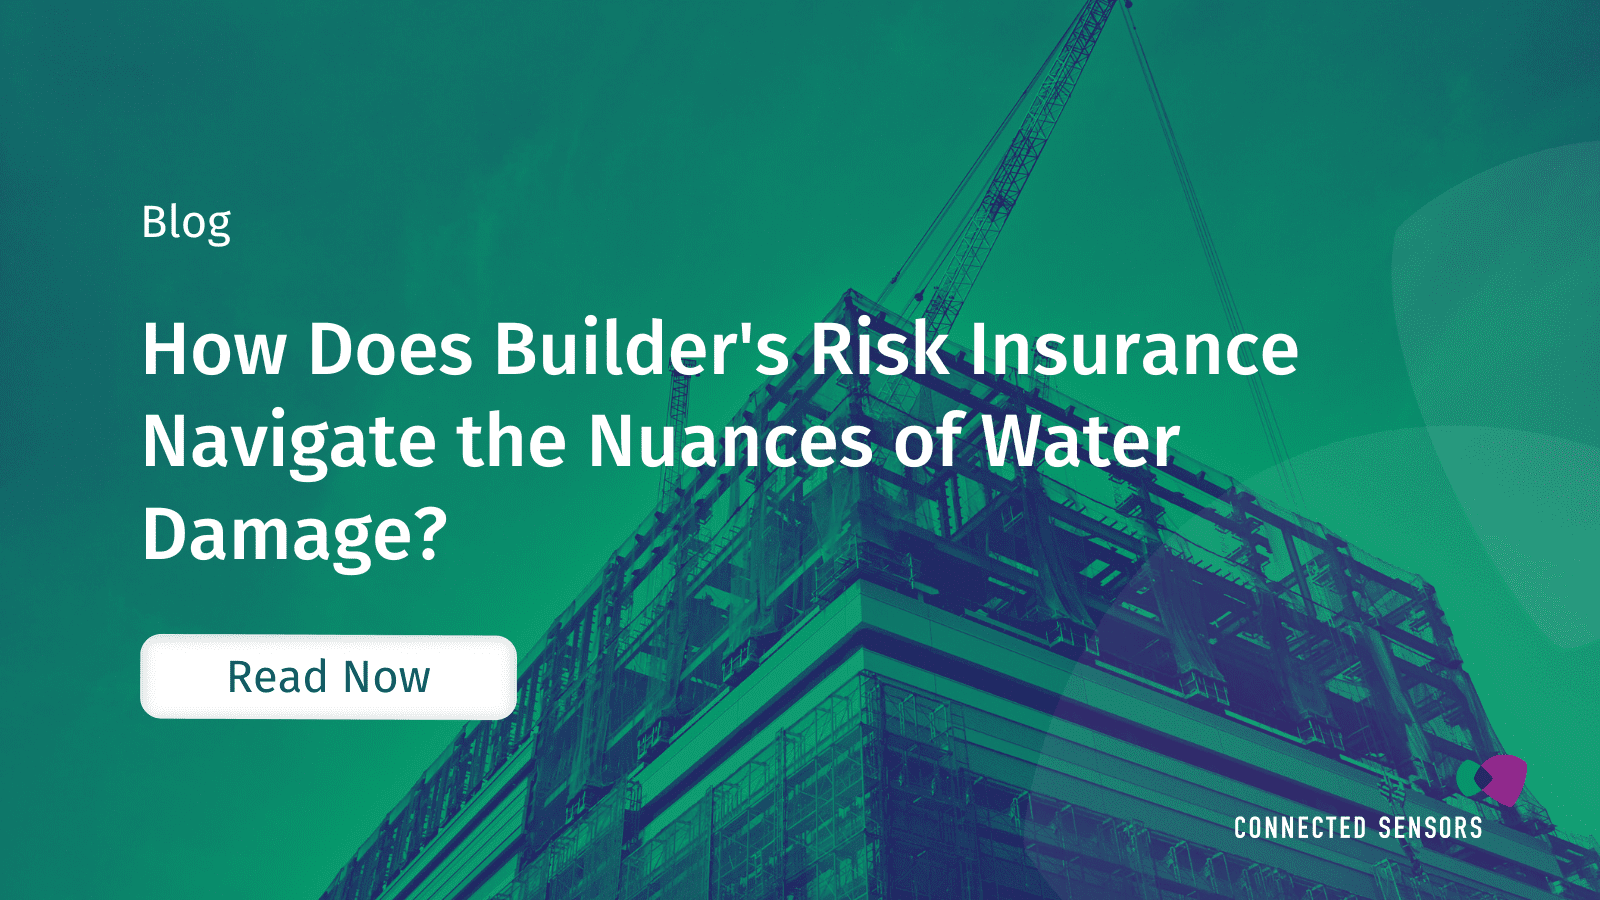 How Does Builder's Risk Insurance Navigate the Nuances of Water Damage?